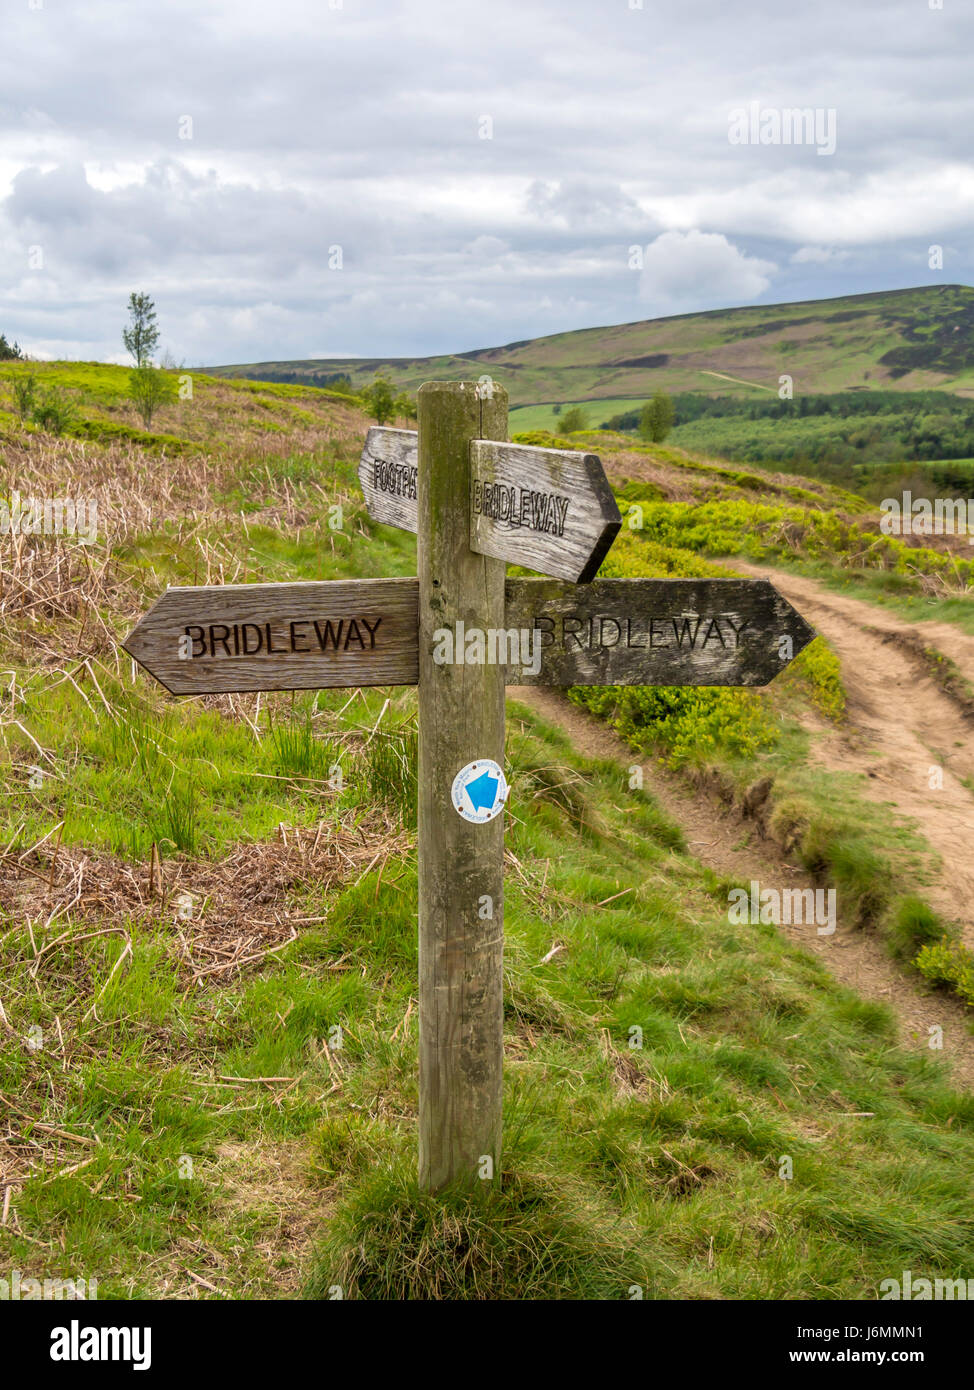 A wooden sign post in the North Yorkshire Moors indicating a 4-way junction with three bridleways and one footpath Stock Photo